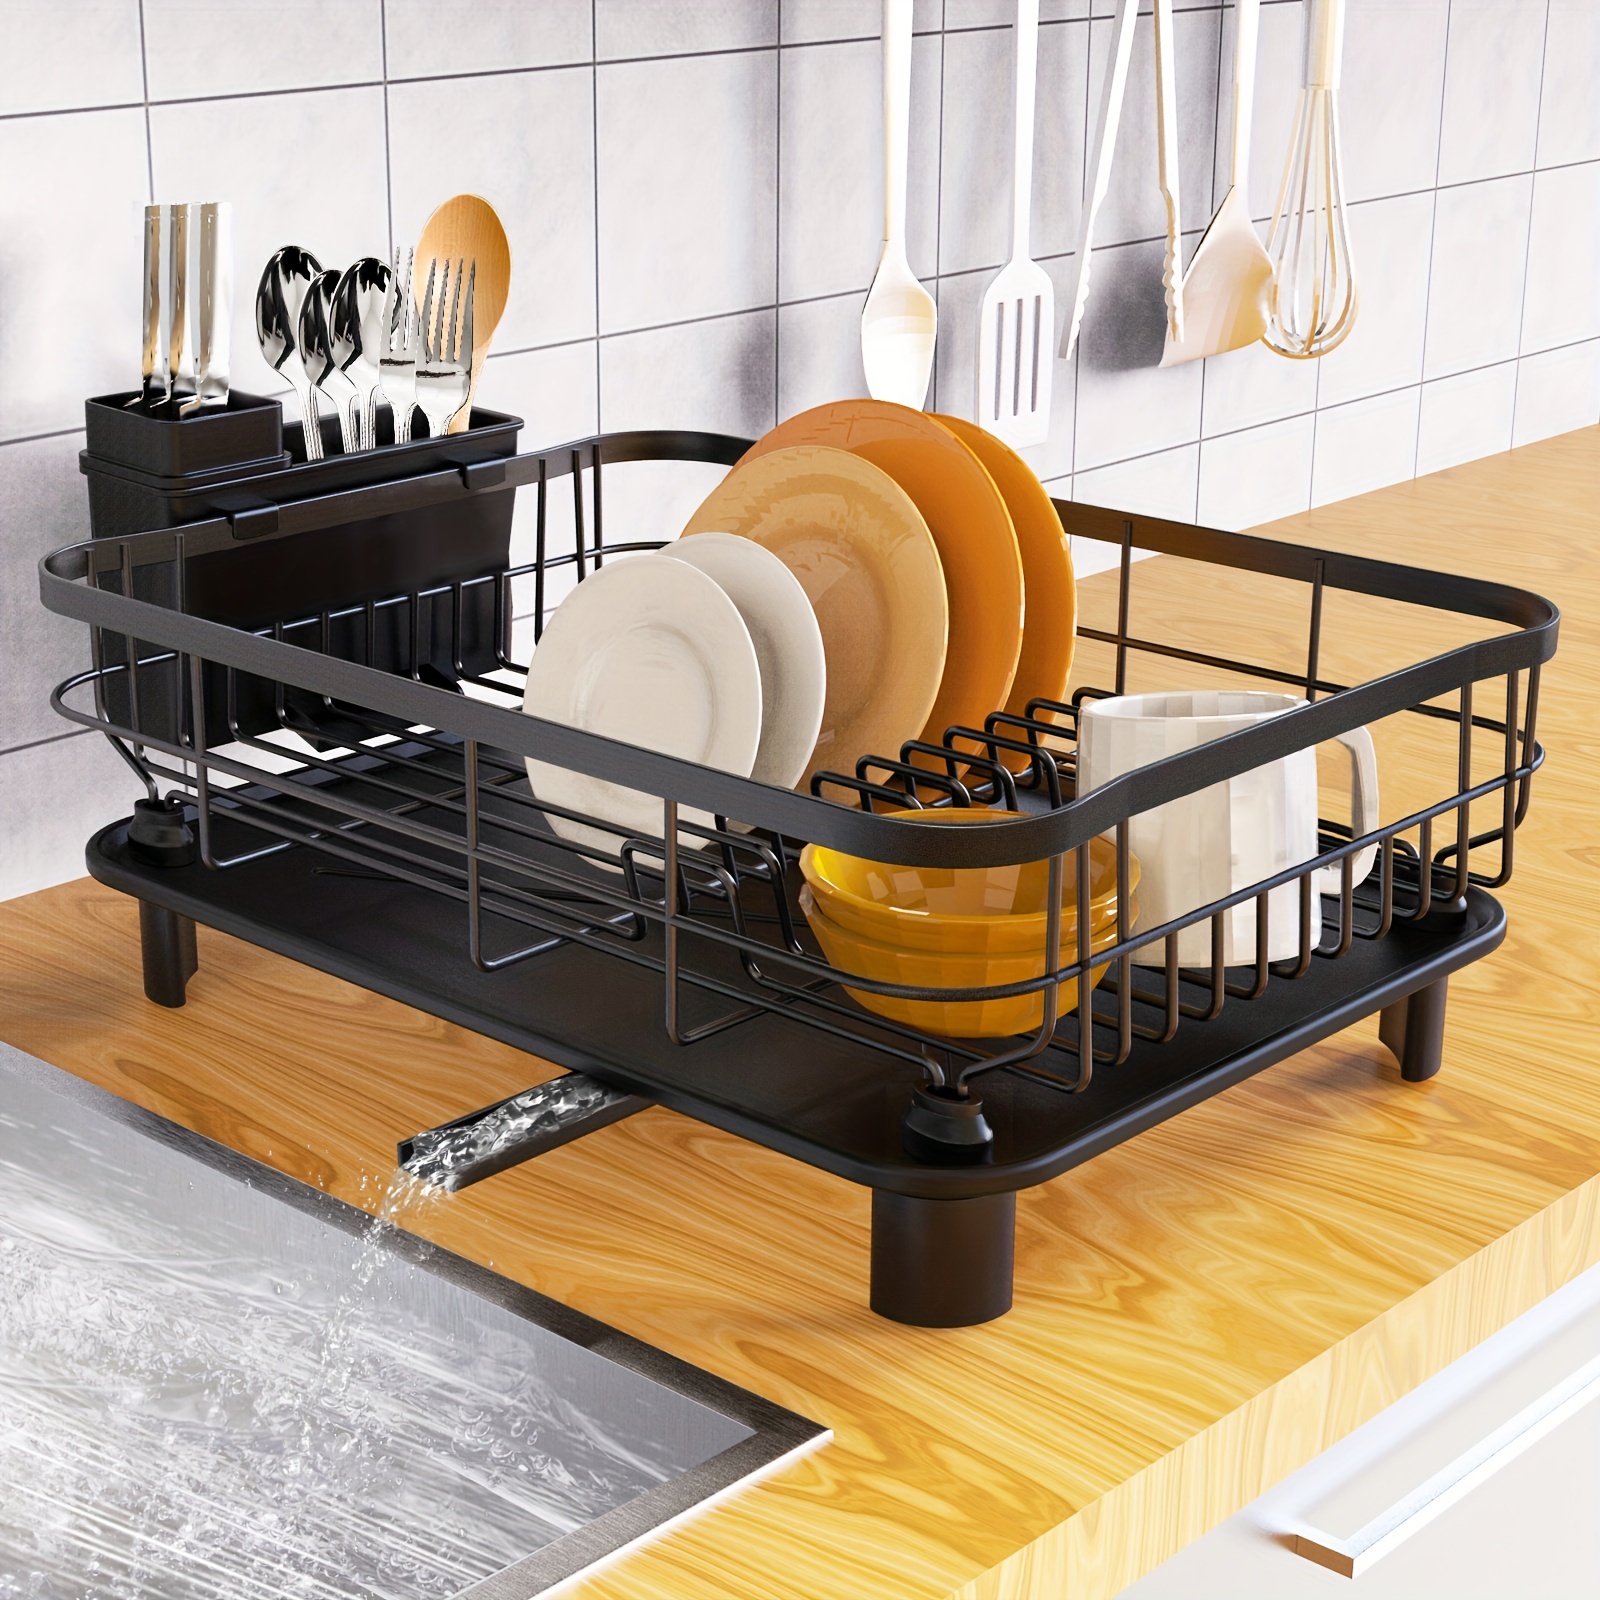 Dish Rack with Swivel Spout, Dish Drying Rack with Drainboard